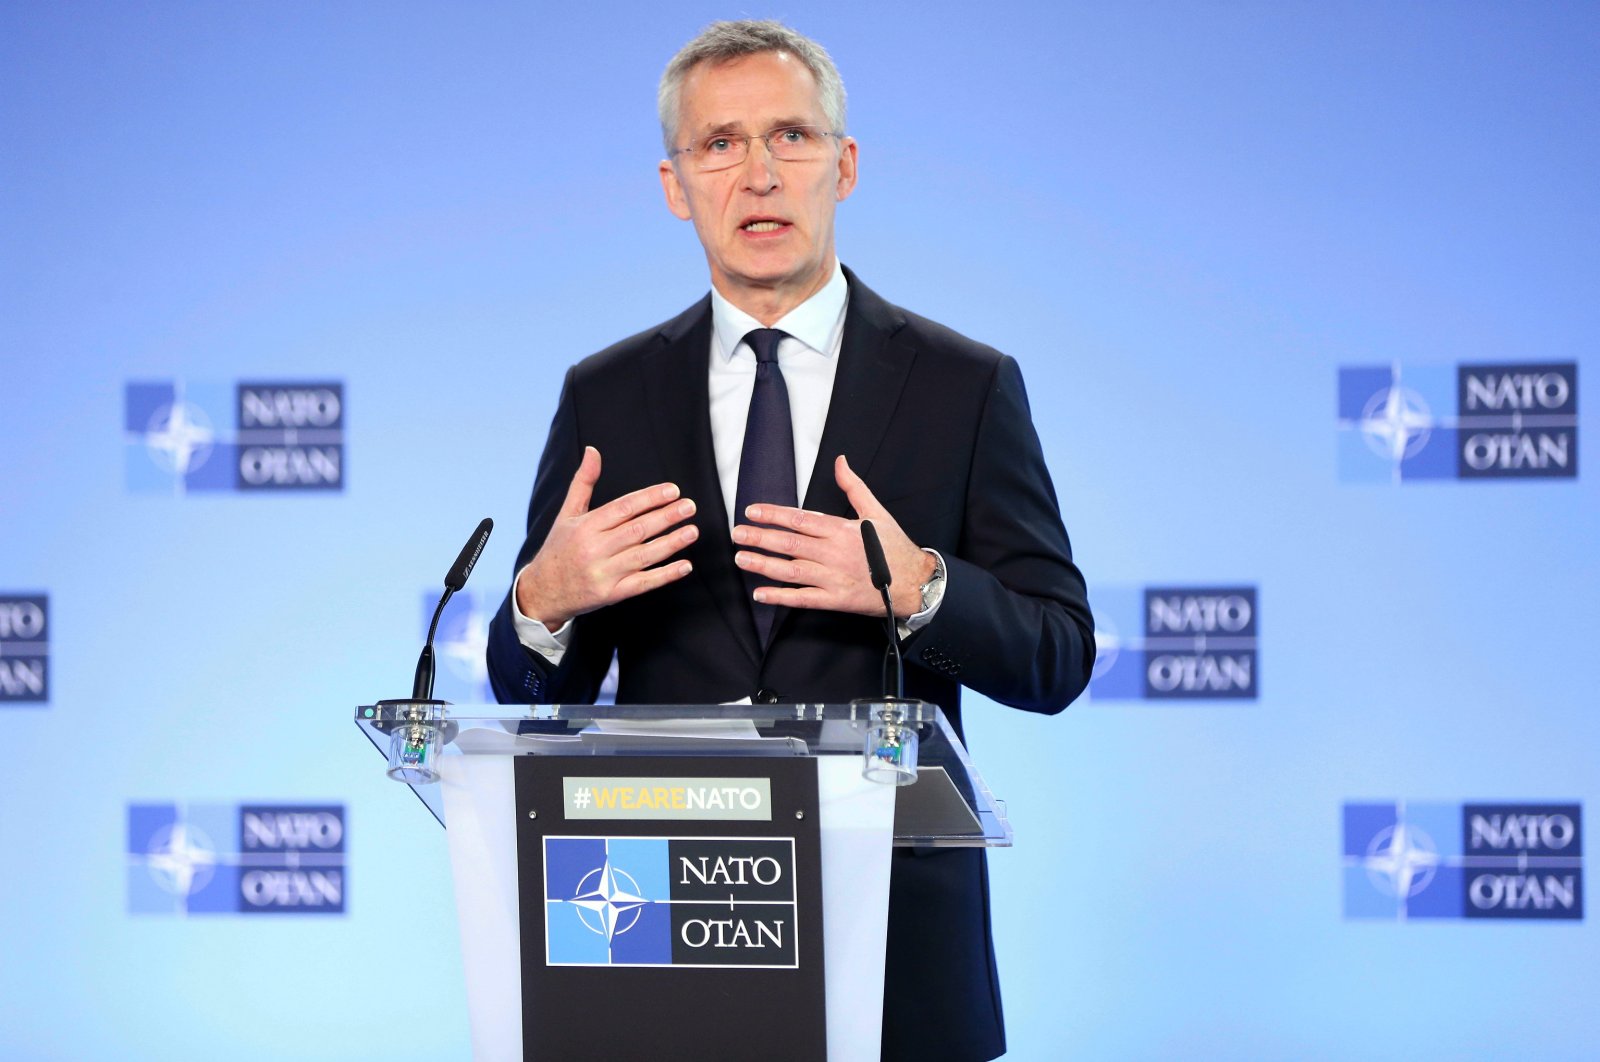 NATO Secretary-General Jens Stoltenberg during a news conference at NATO's headquarters in Brussels, Belgium, March 4, 2020. (AA Photo)